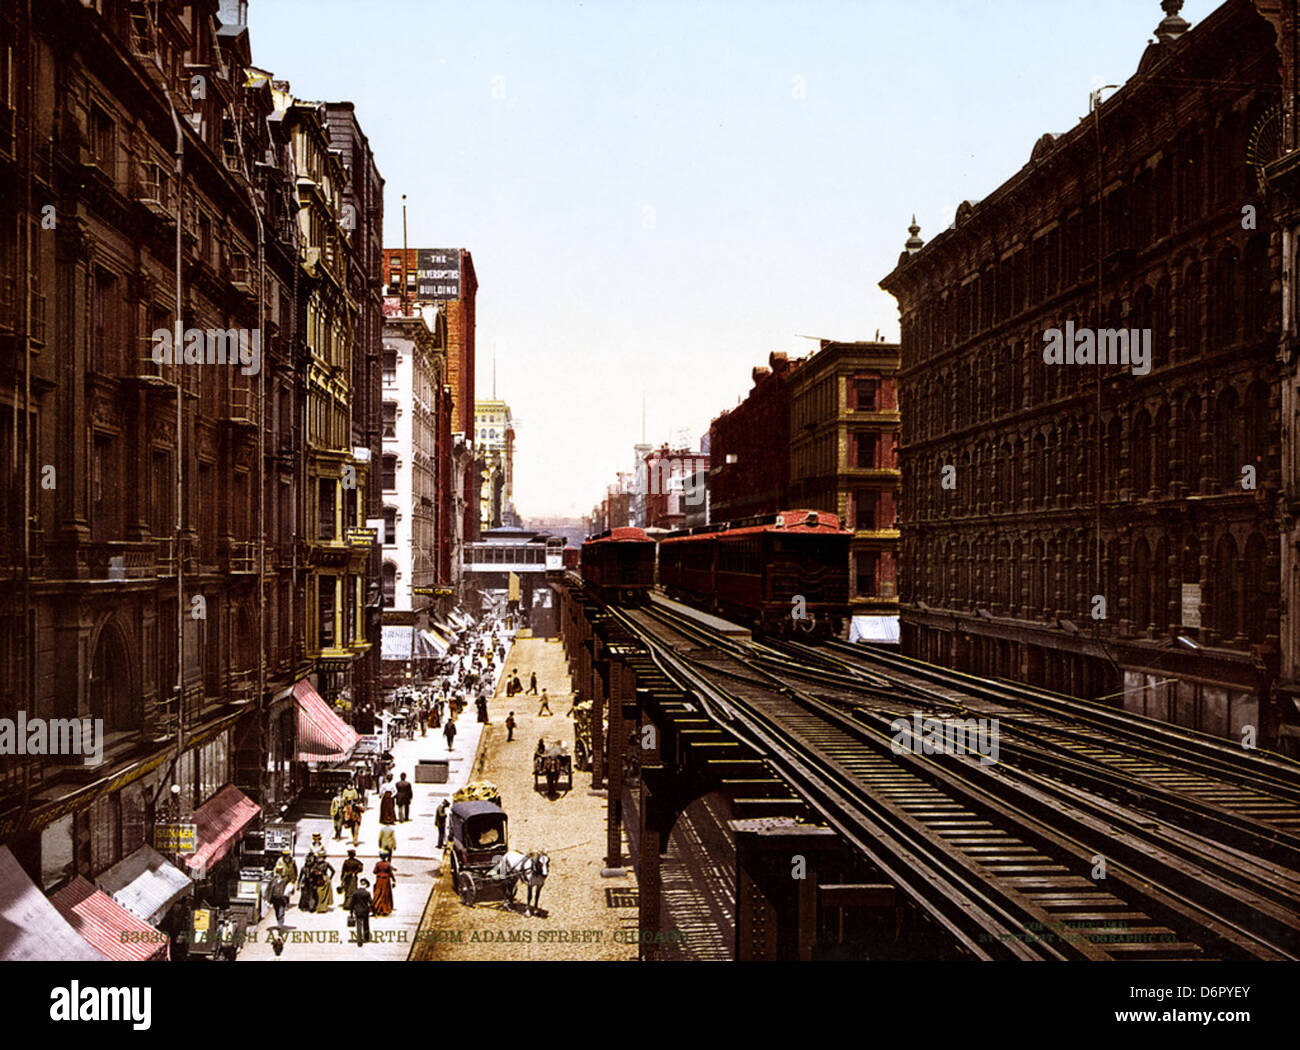 Wabash Ave north from Adams Street, Chicago, Illinois, 1900 Stock Photo